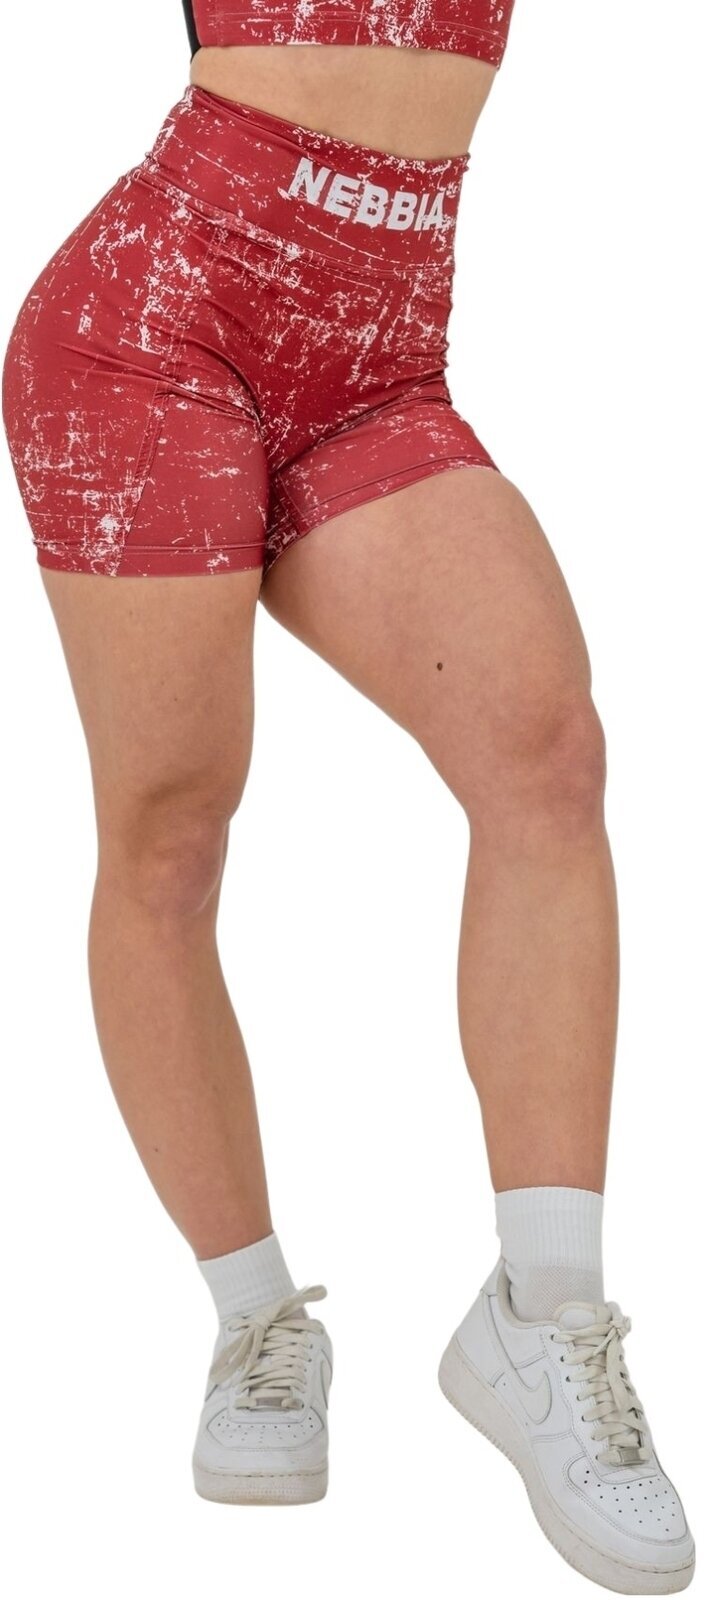 Nebbia High Waisted Leggings Shorts 5" Hammies Red L Fitness nohavice